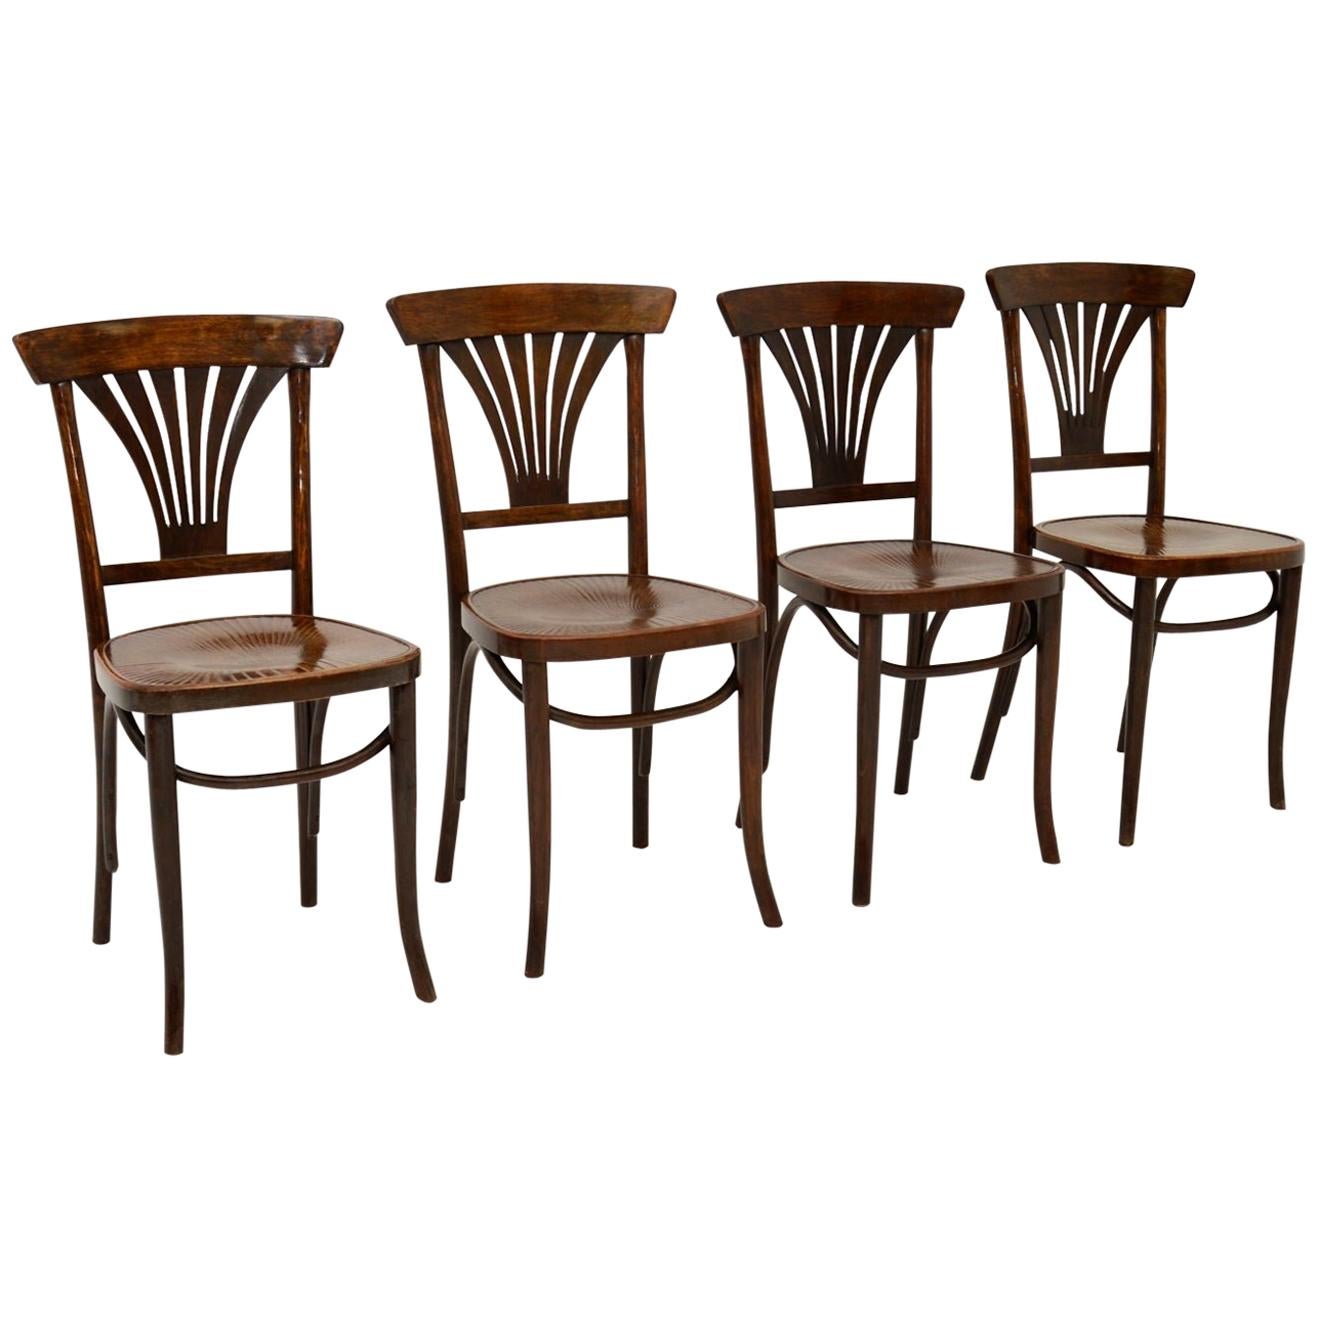 Set of 4 Antique Bentwood Cafe Dining Chairs